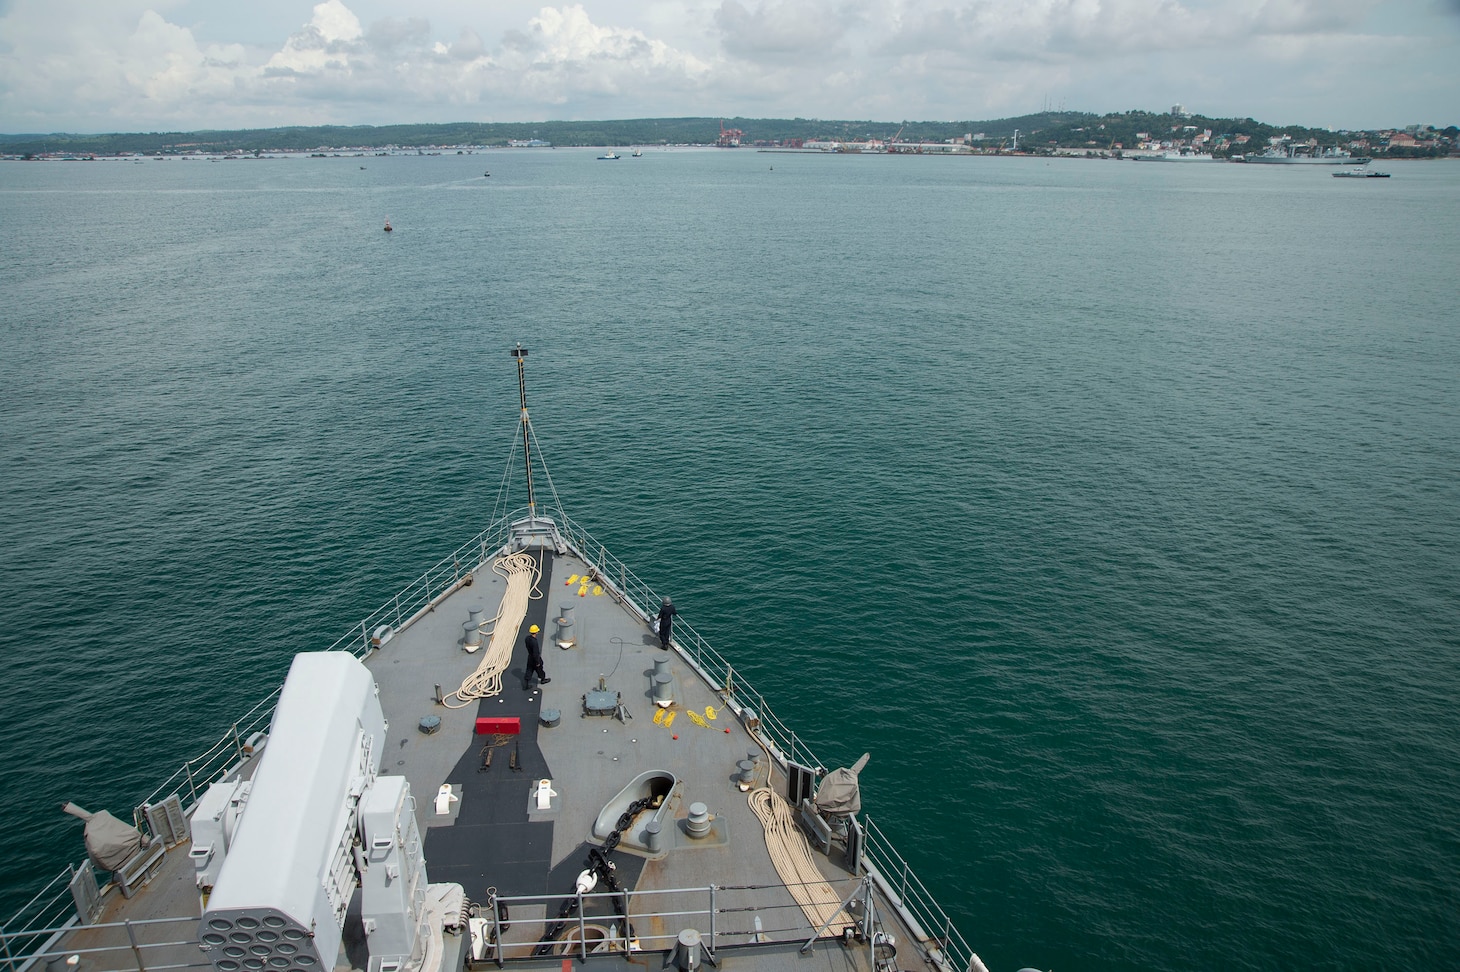 SIHANOUKVILLE, Cambodia (Oct. 16, 2016) The Whidbey Island-class amphibious dock landing ship USS Germantown (LSD 42) pulls into Sihanoukville, Cambodia, for a port visit. Germantown, attached to Expeditionary Strike Group 7, is underw